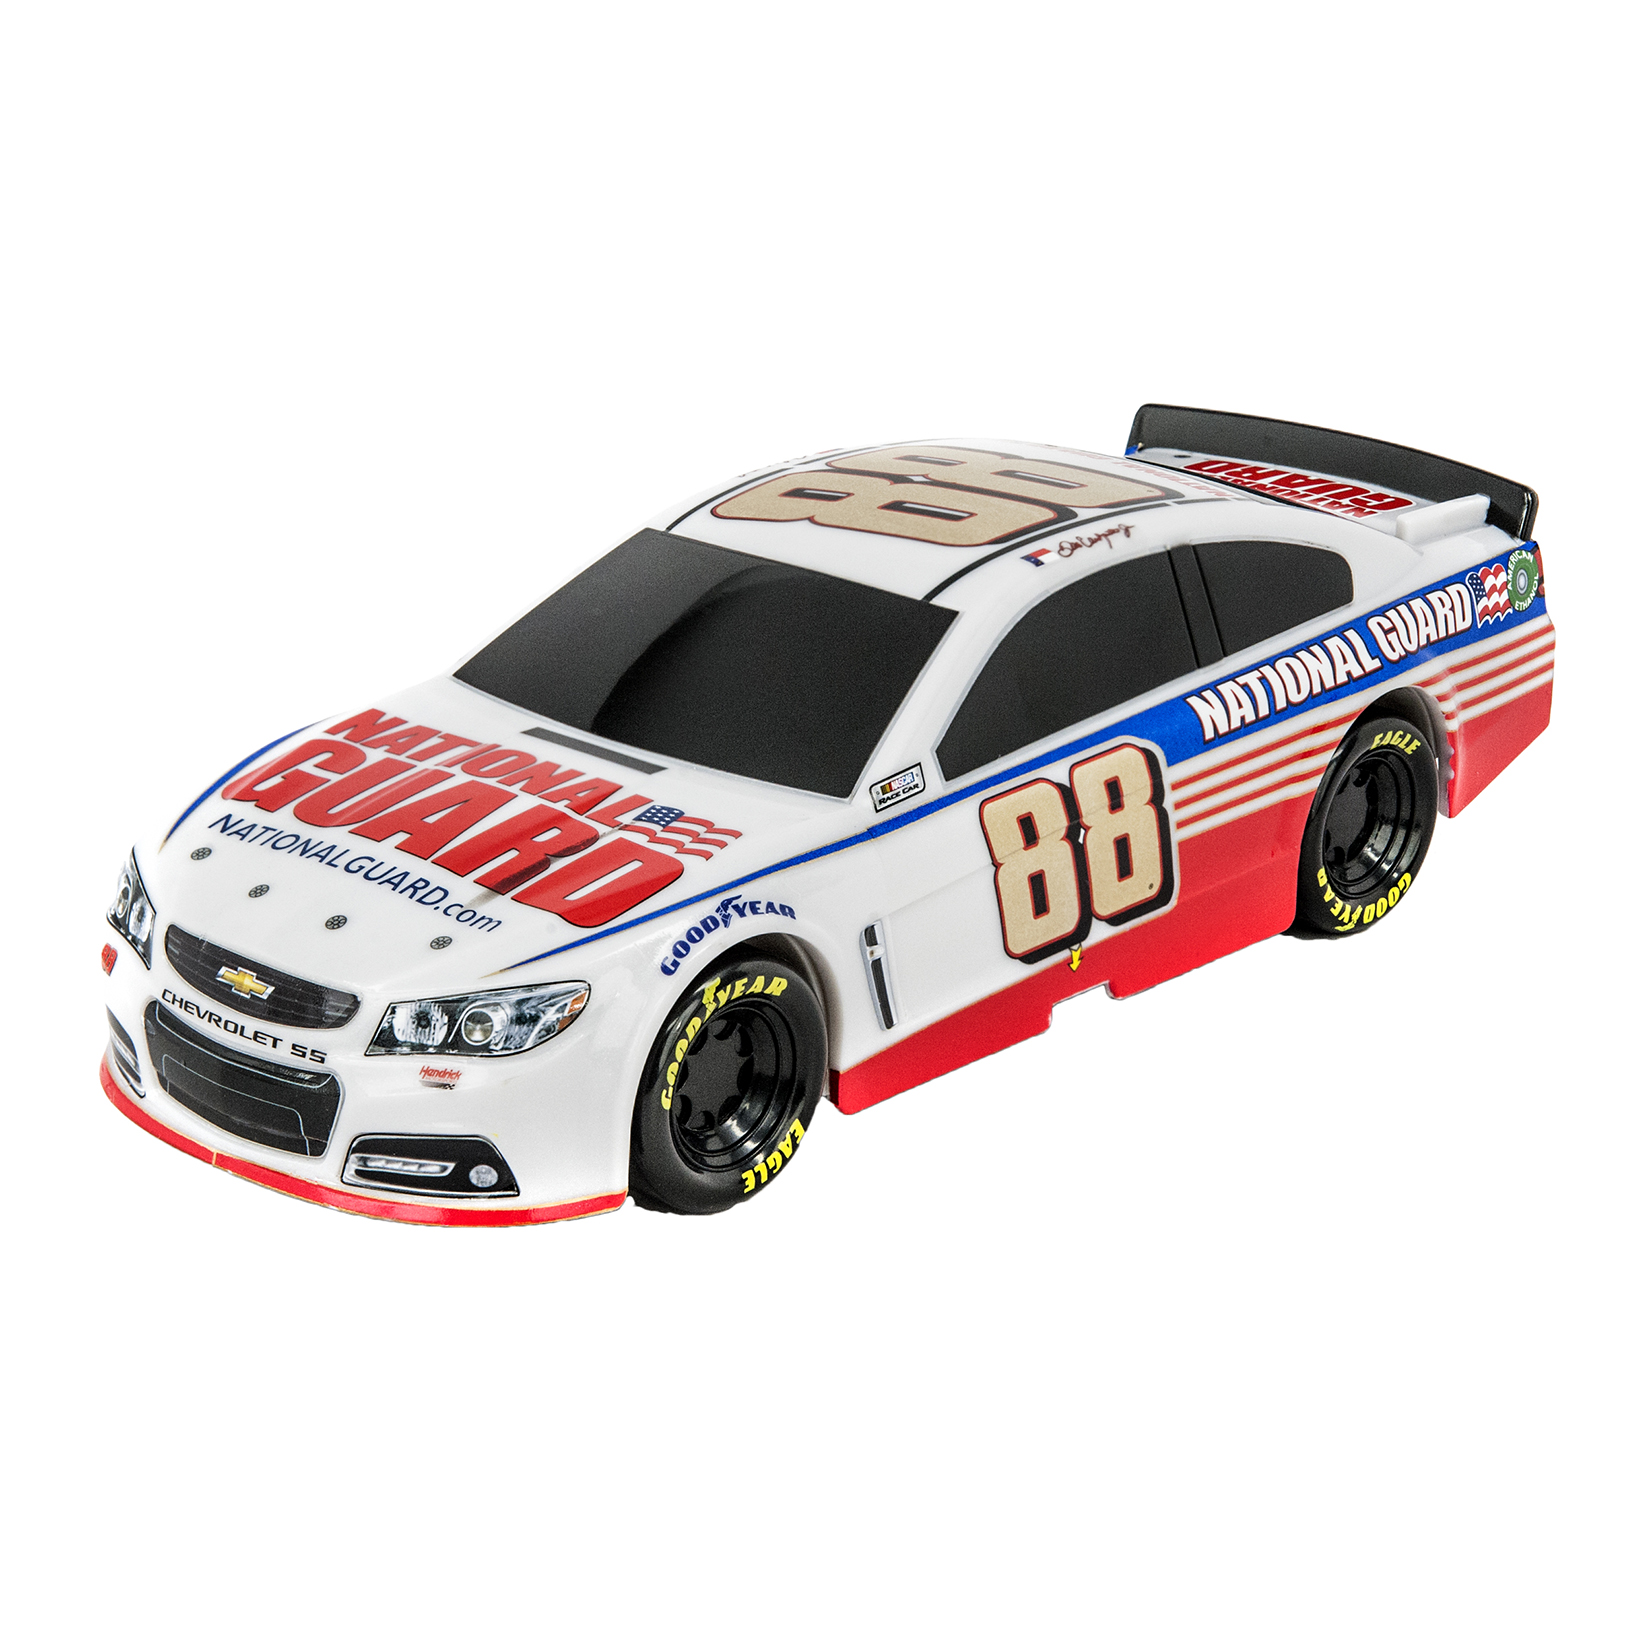 Dale Earnhardt Jr. #88 National Guard 2014 Chevy SS 1:18 Scale ARC Plastic Toy Car